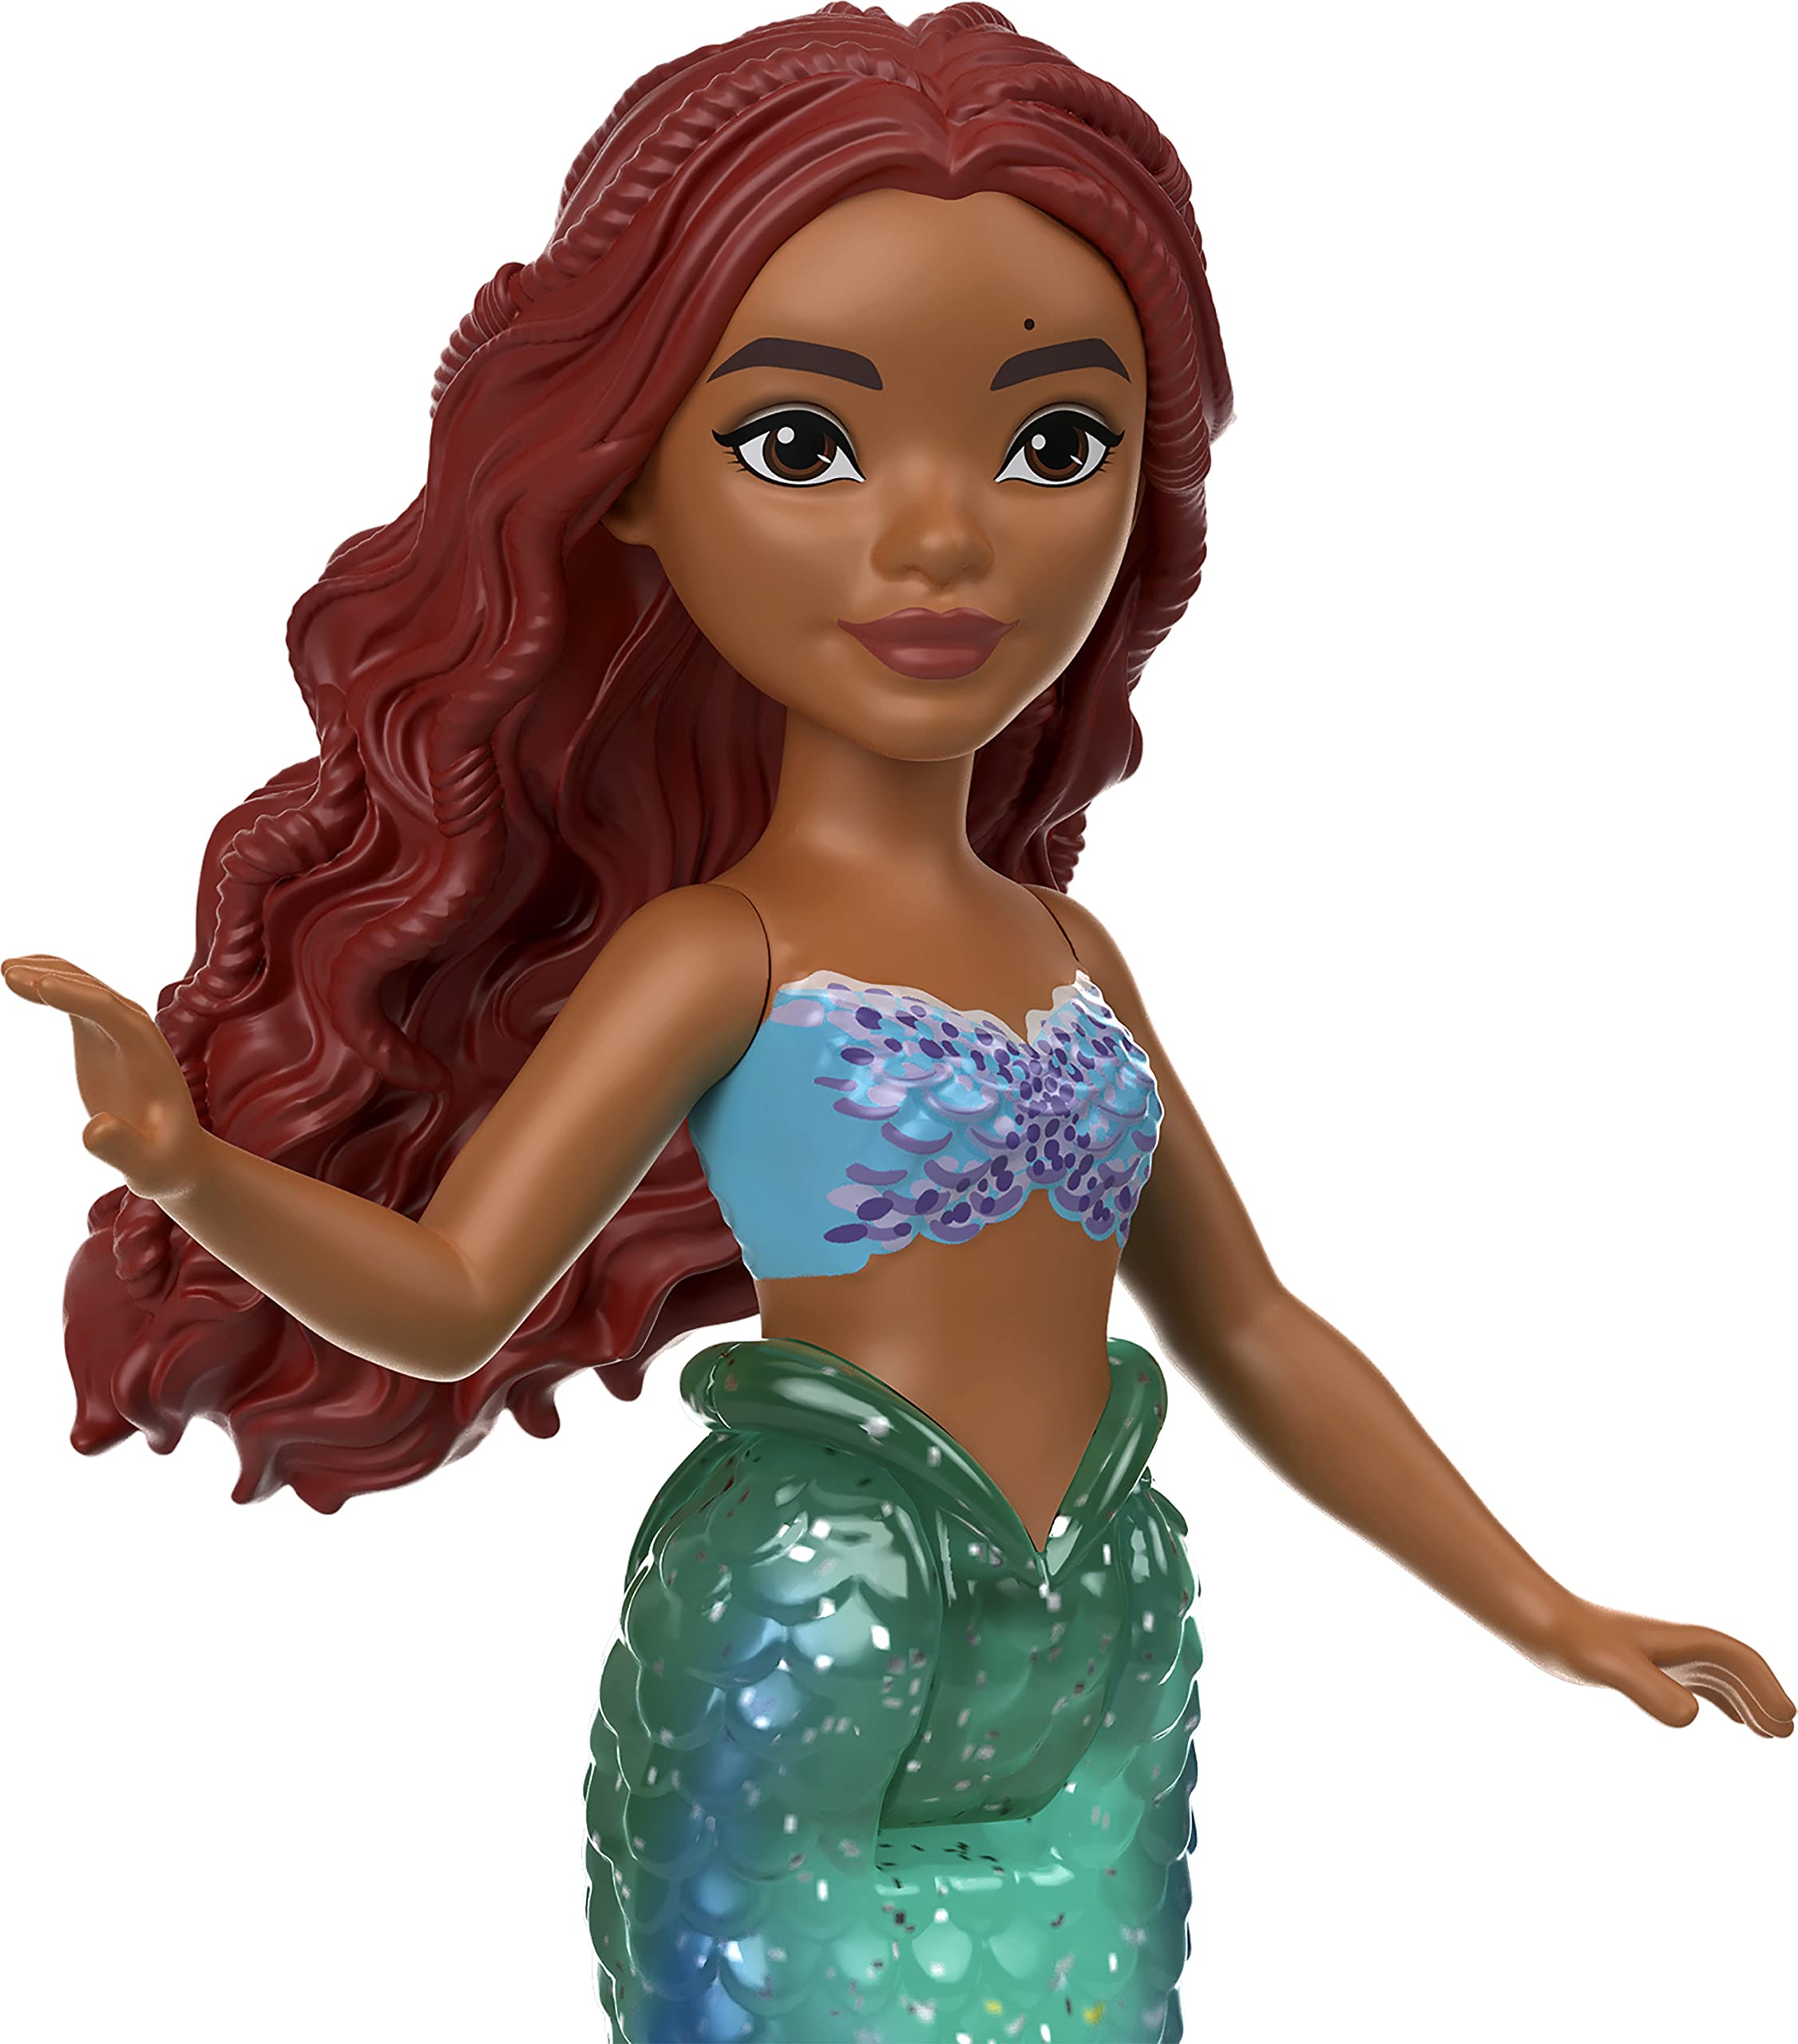 Mattel Disney The Little Mermaid Ariel and Sisters Small Doll Set, Collection of 7 Mermaid Dolls, Toys Inspired by the Movie